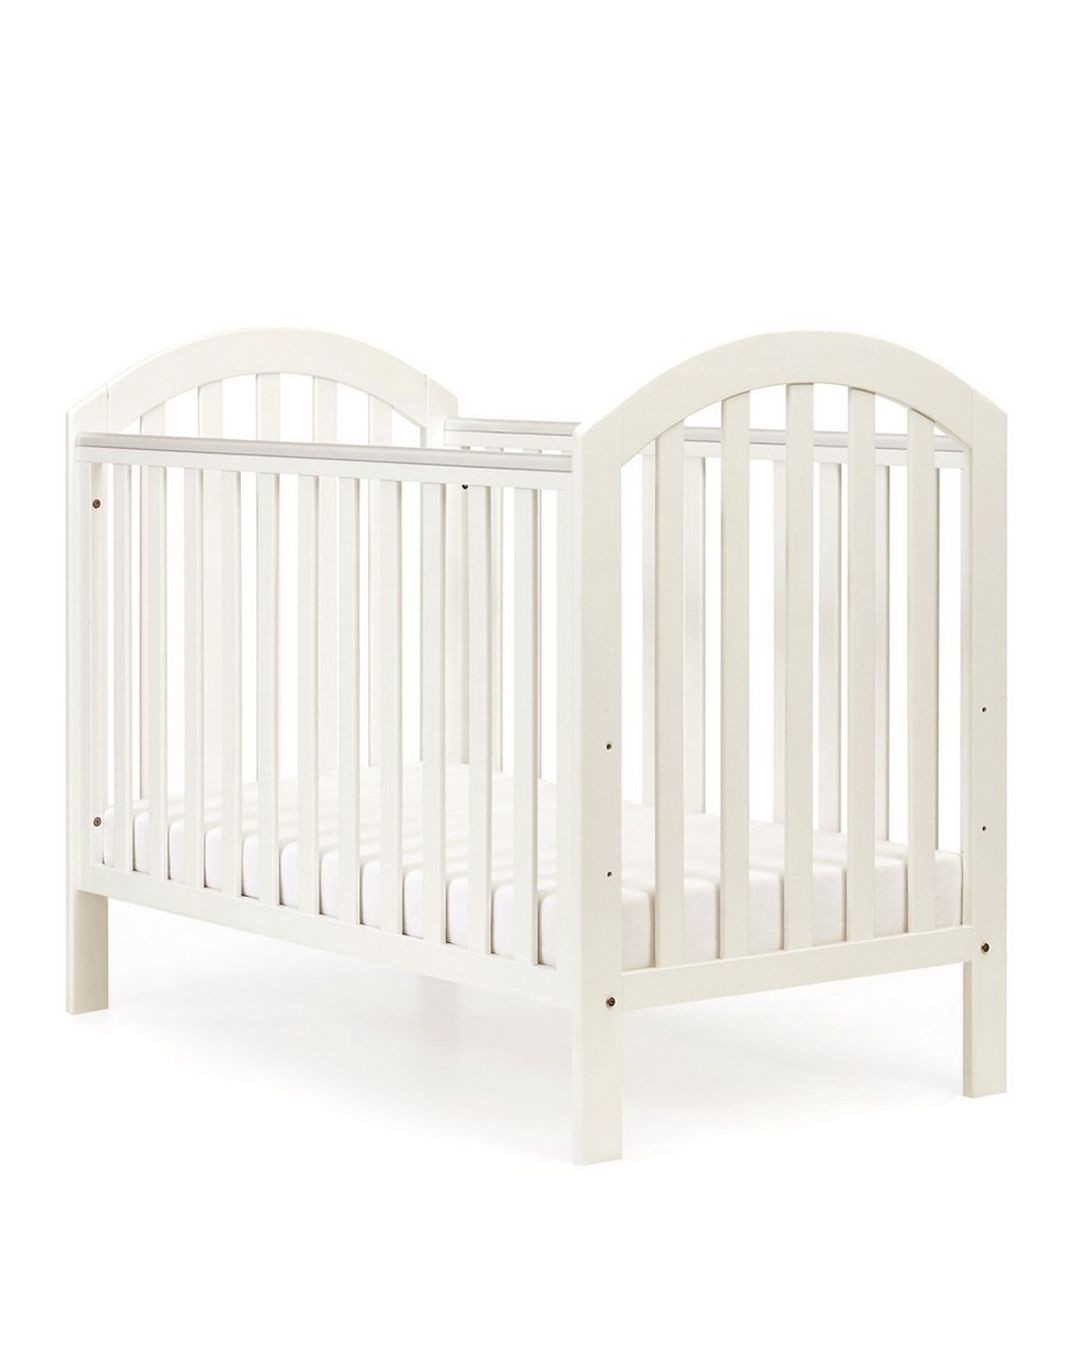 Mothercare Marlow Cot White Crib